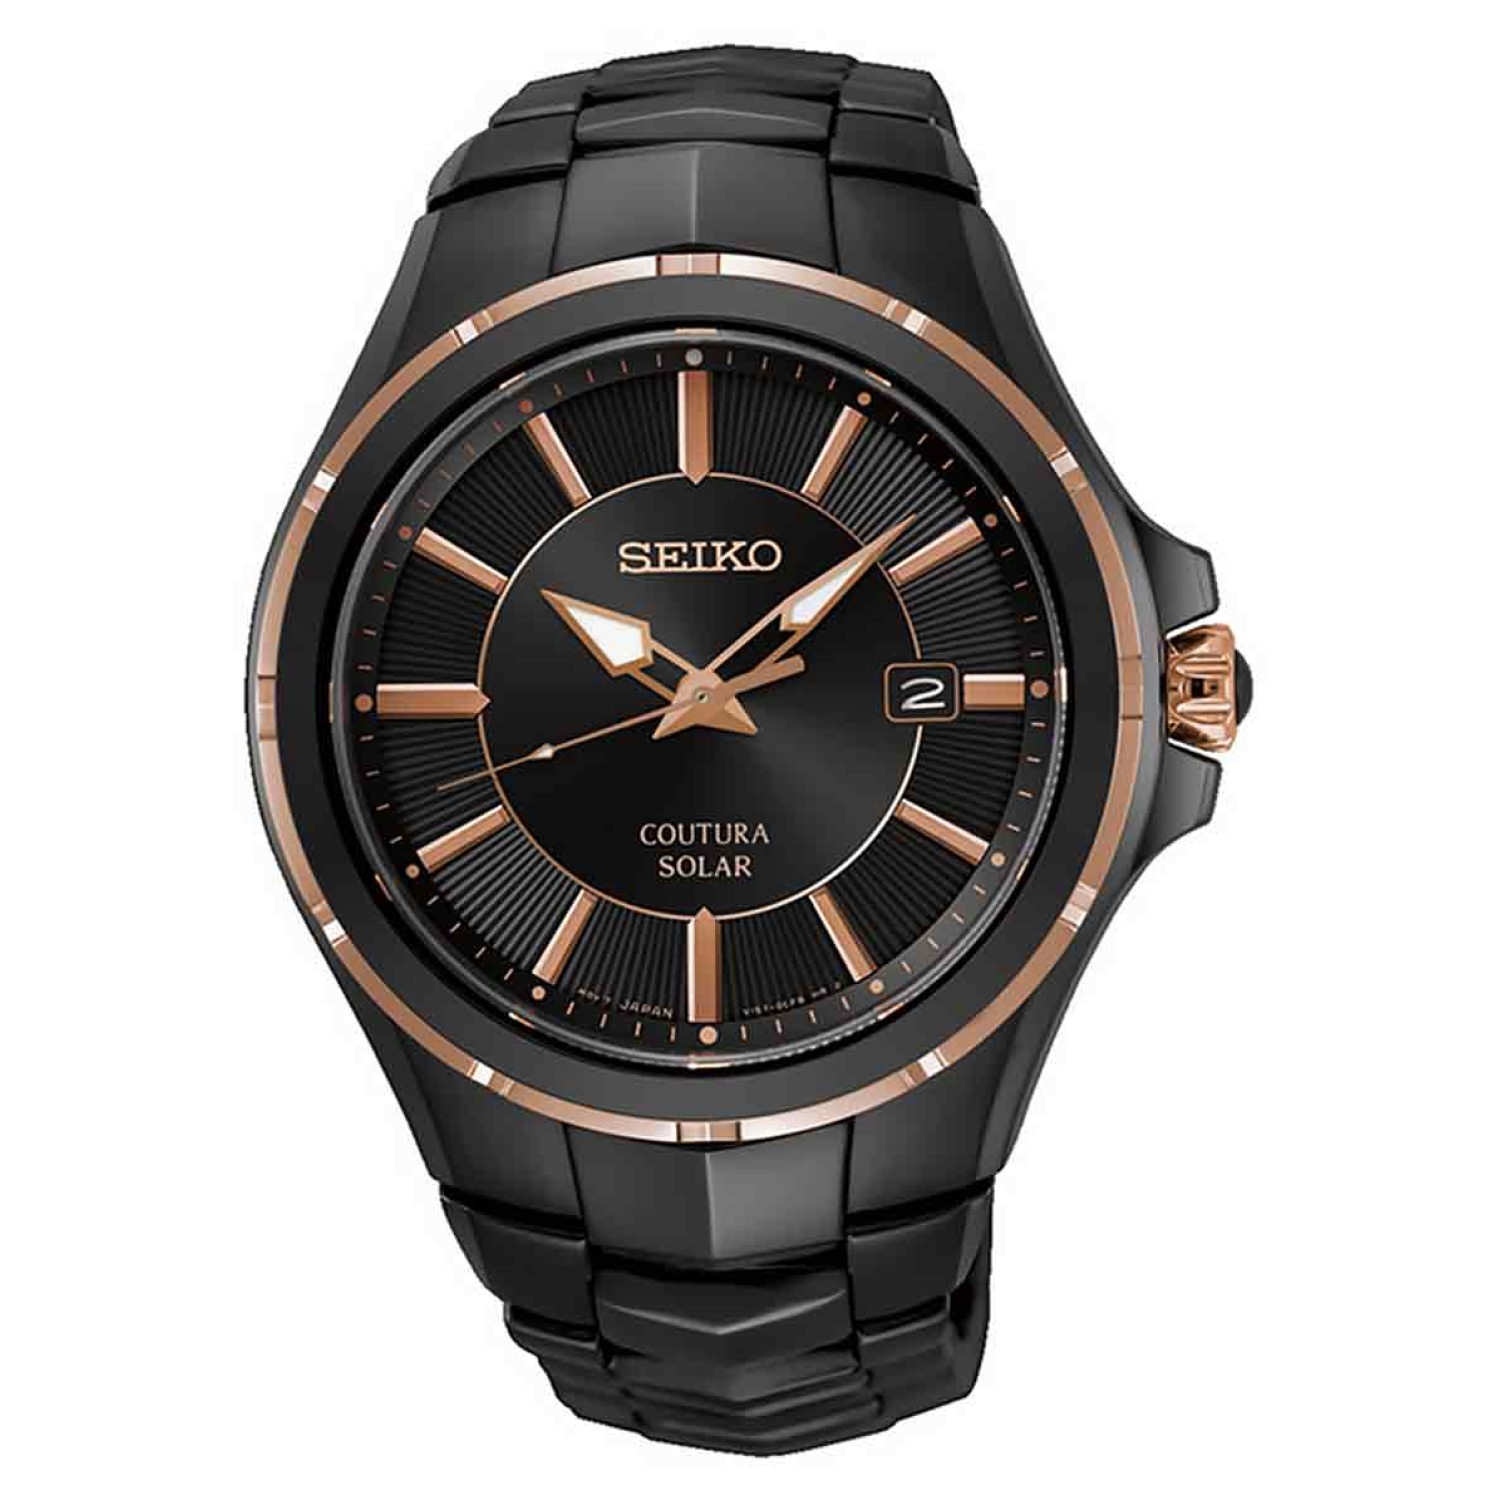 SNE516P SEIKO Coutura Sports Solar Watch. Unique and innovative in design is this mens watch from Seiko. This solar watch features a black face contrasting with a two tone rose gold and black band.3 Months No Payments and Interest for Q Card holders Oxipa